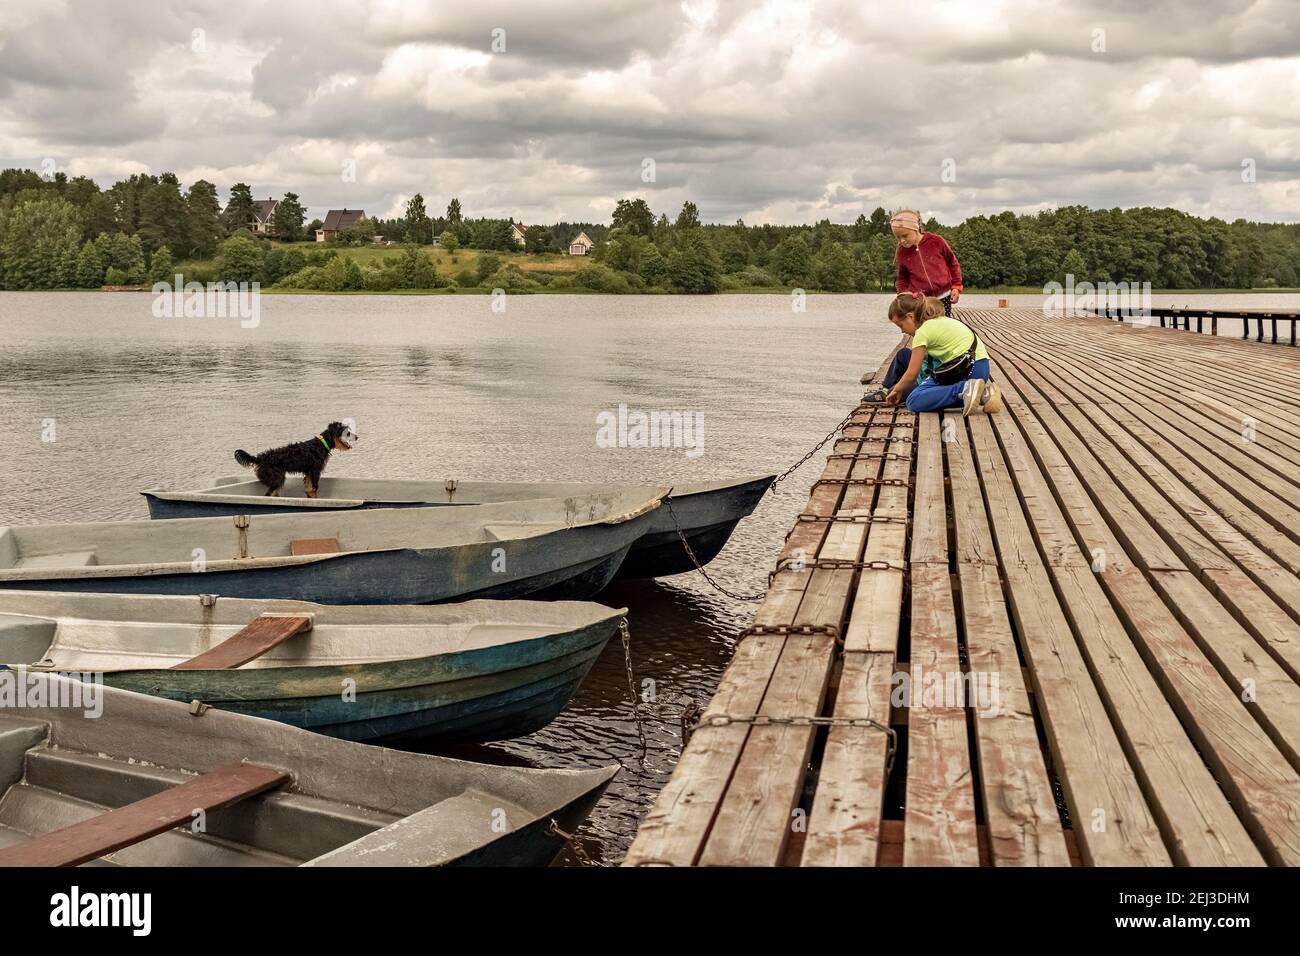 Children tie a boat to a wooden pier on a lake at sunset in summer. Dog in the boat. The clouds are thunderous in the sky. Landscape. Stock Photo